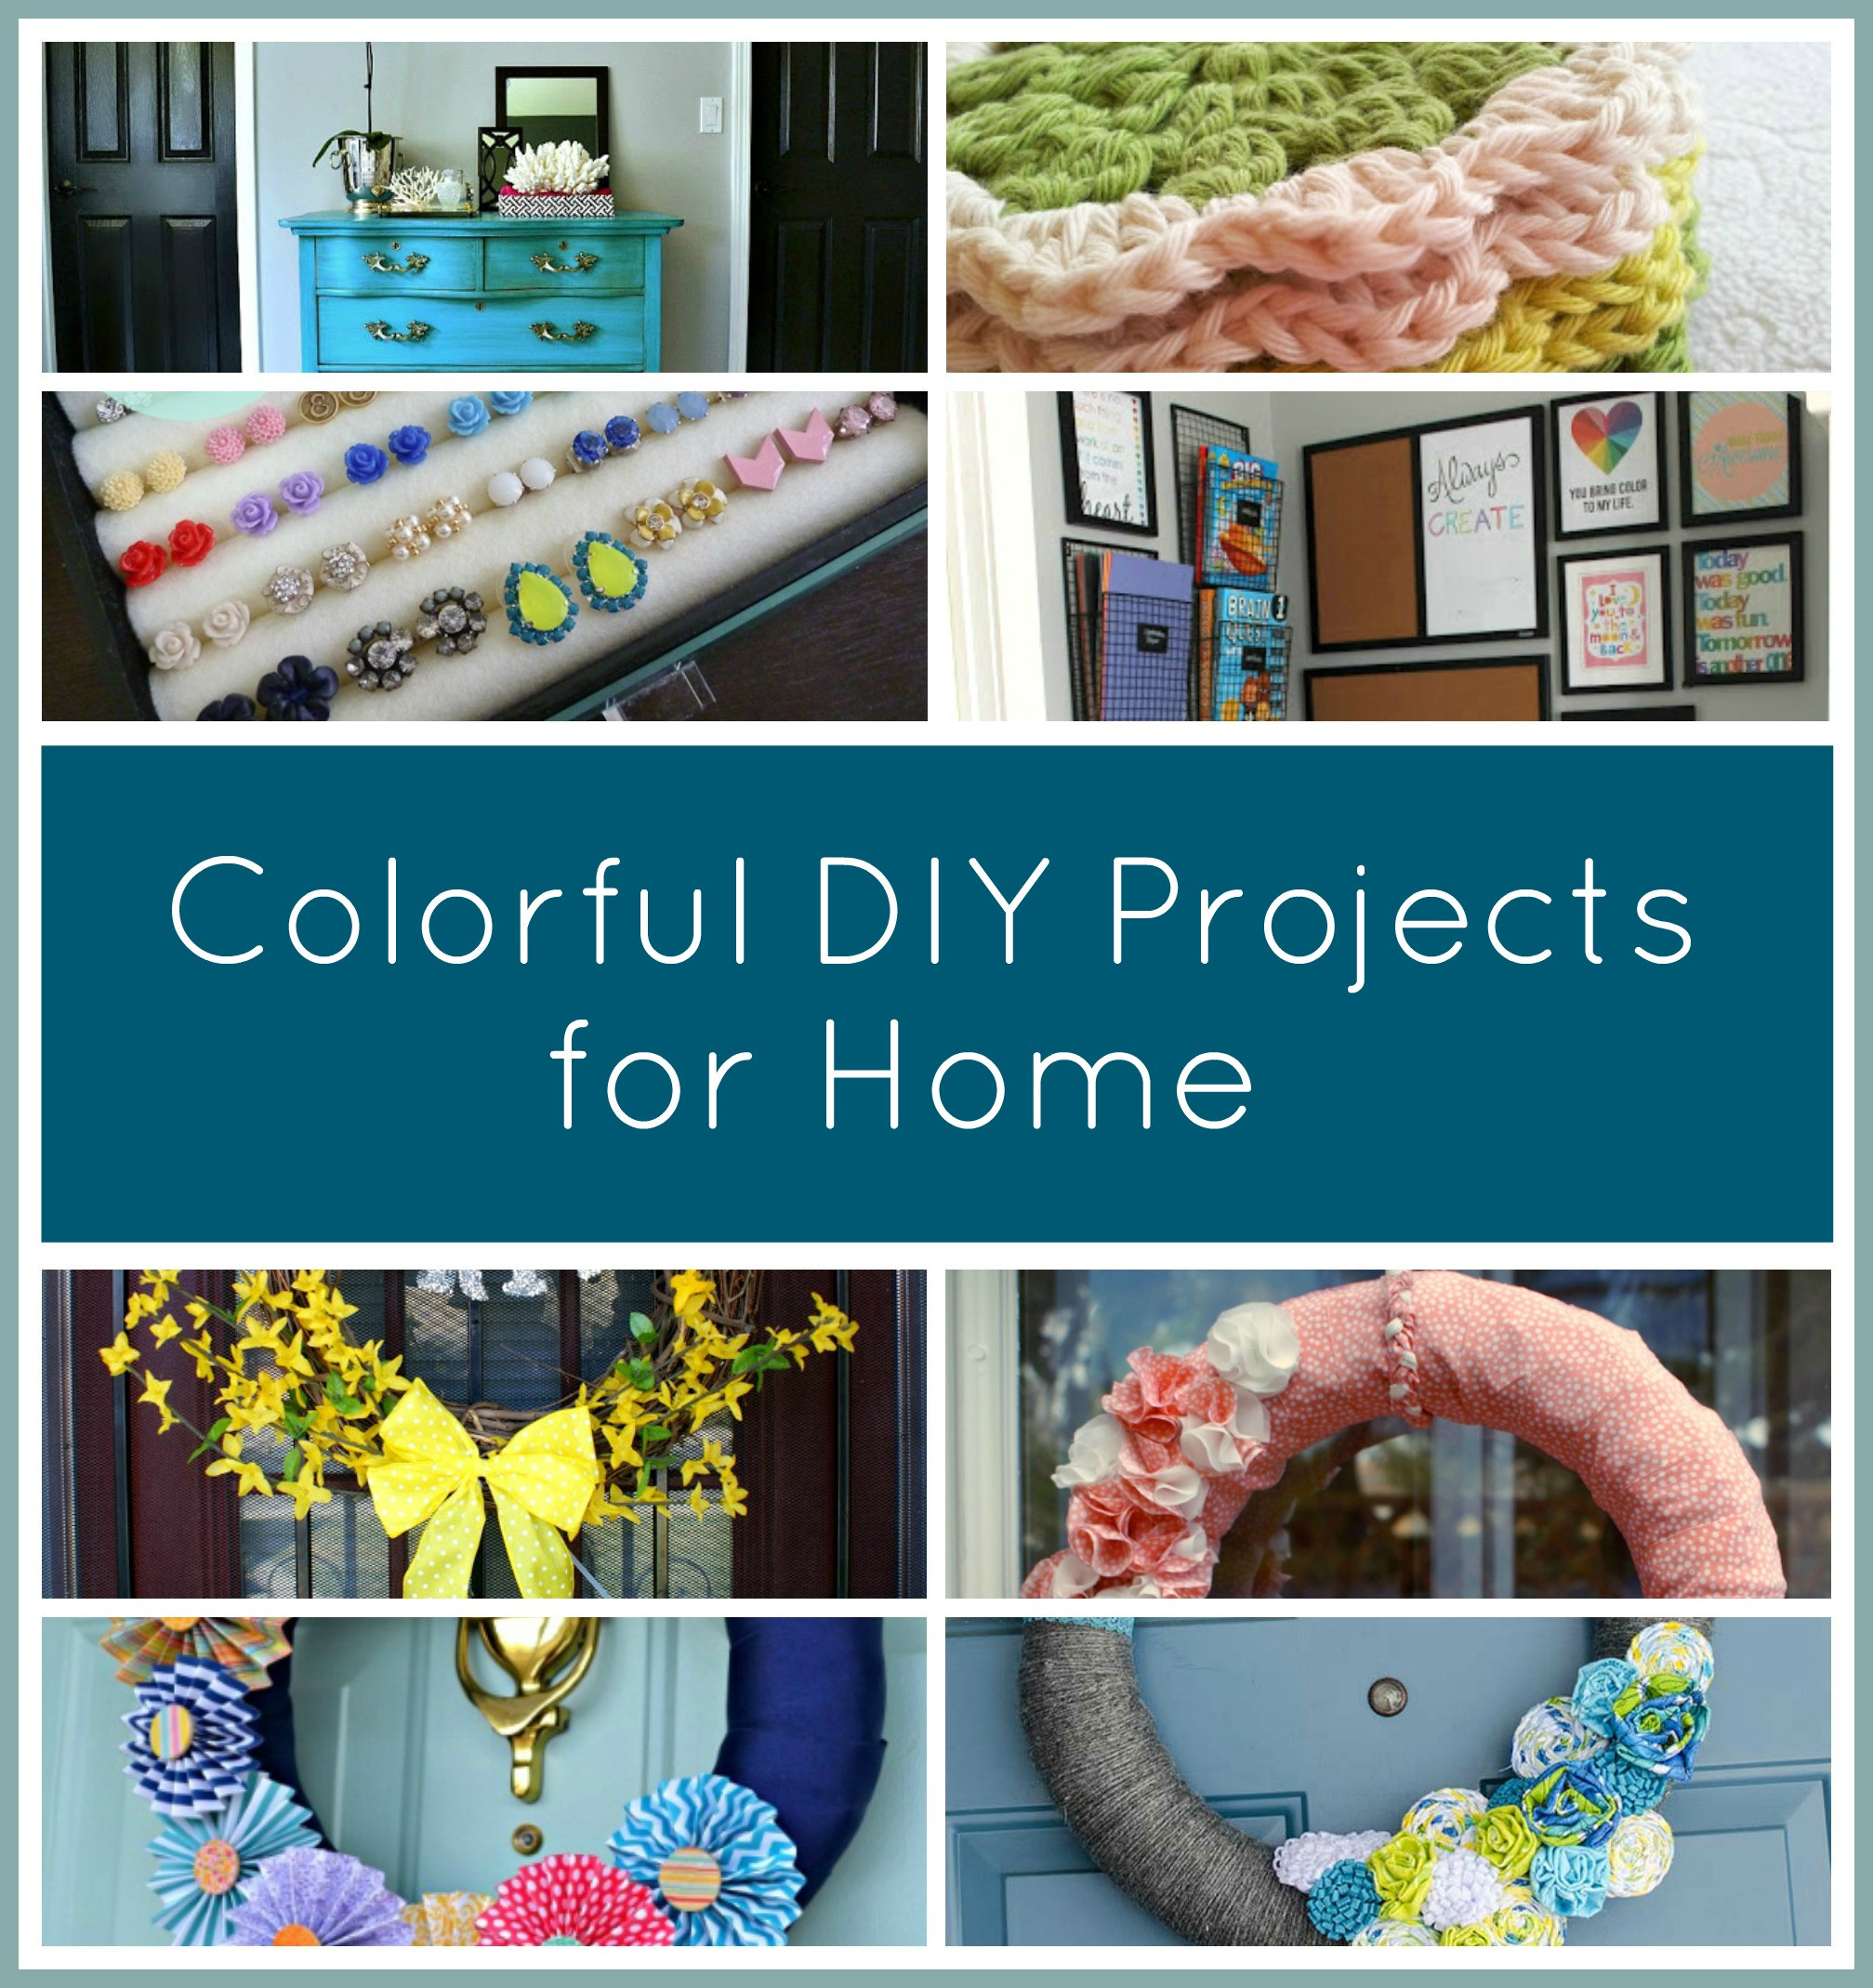 Best ideas about DIY Home Projects
. Save or Pin Craftionary Now.